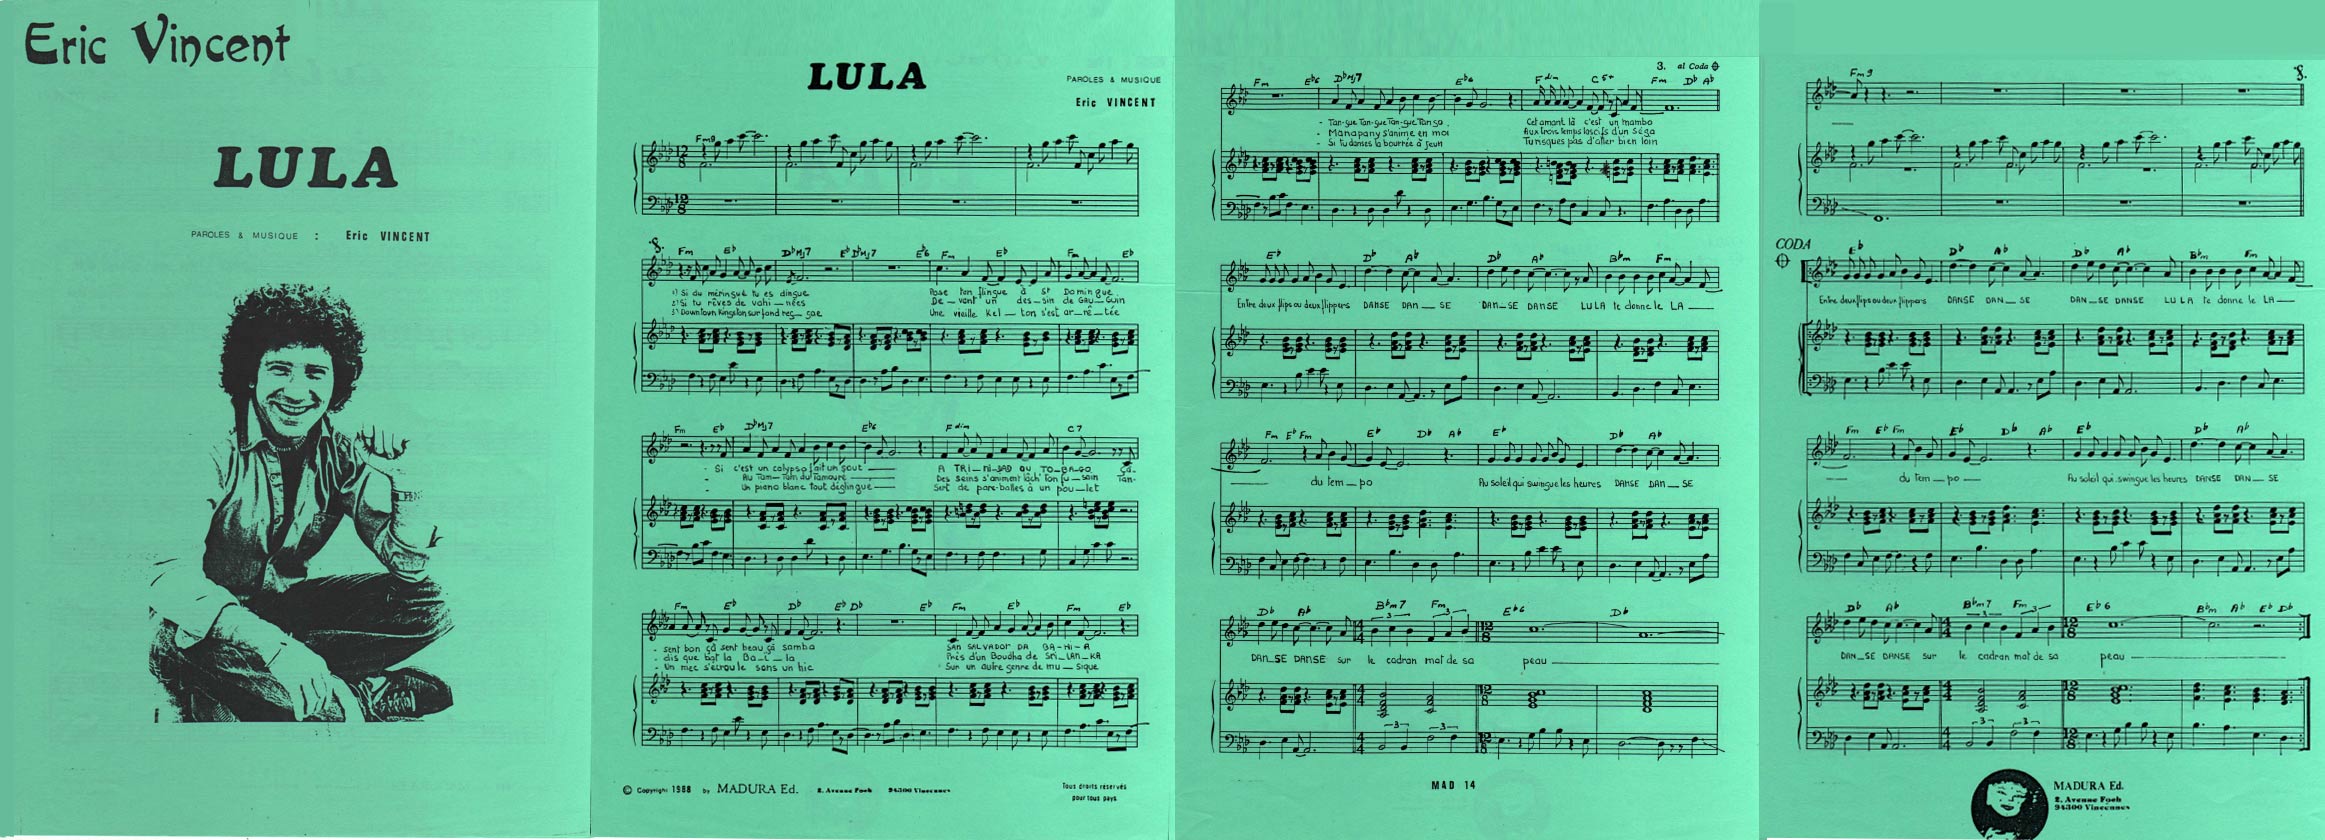 Partition/Sheet Music